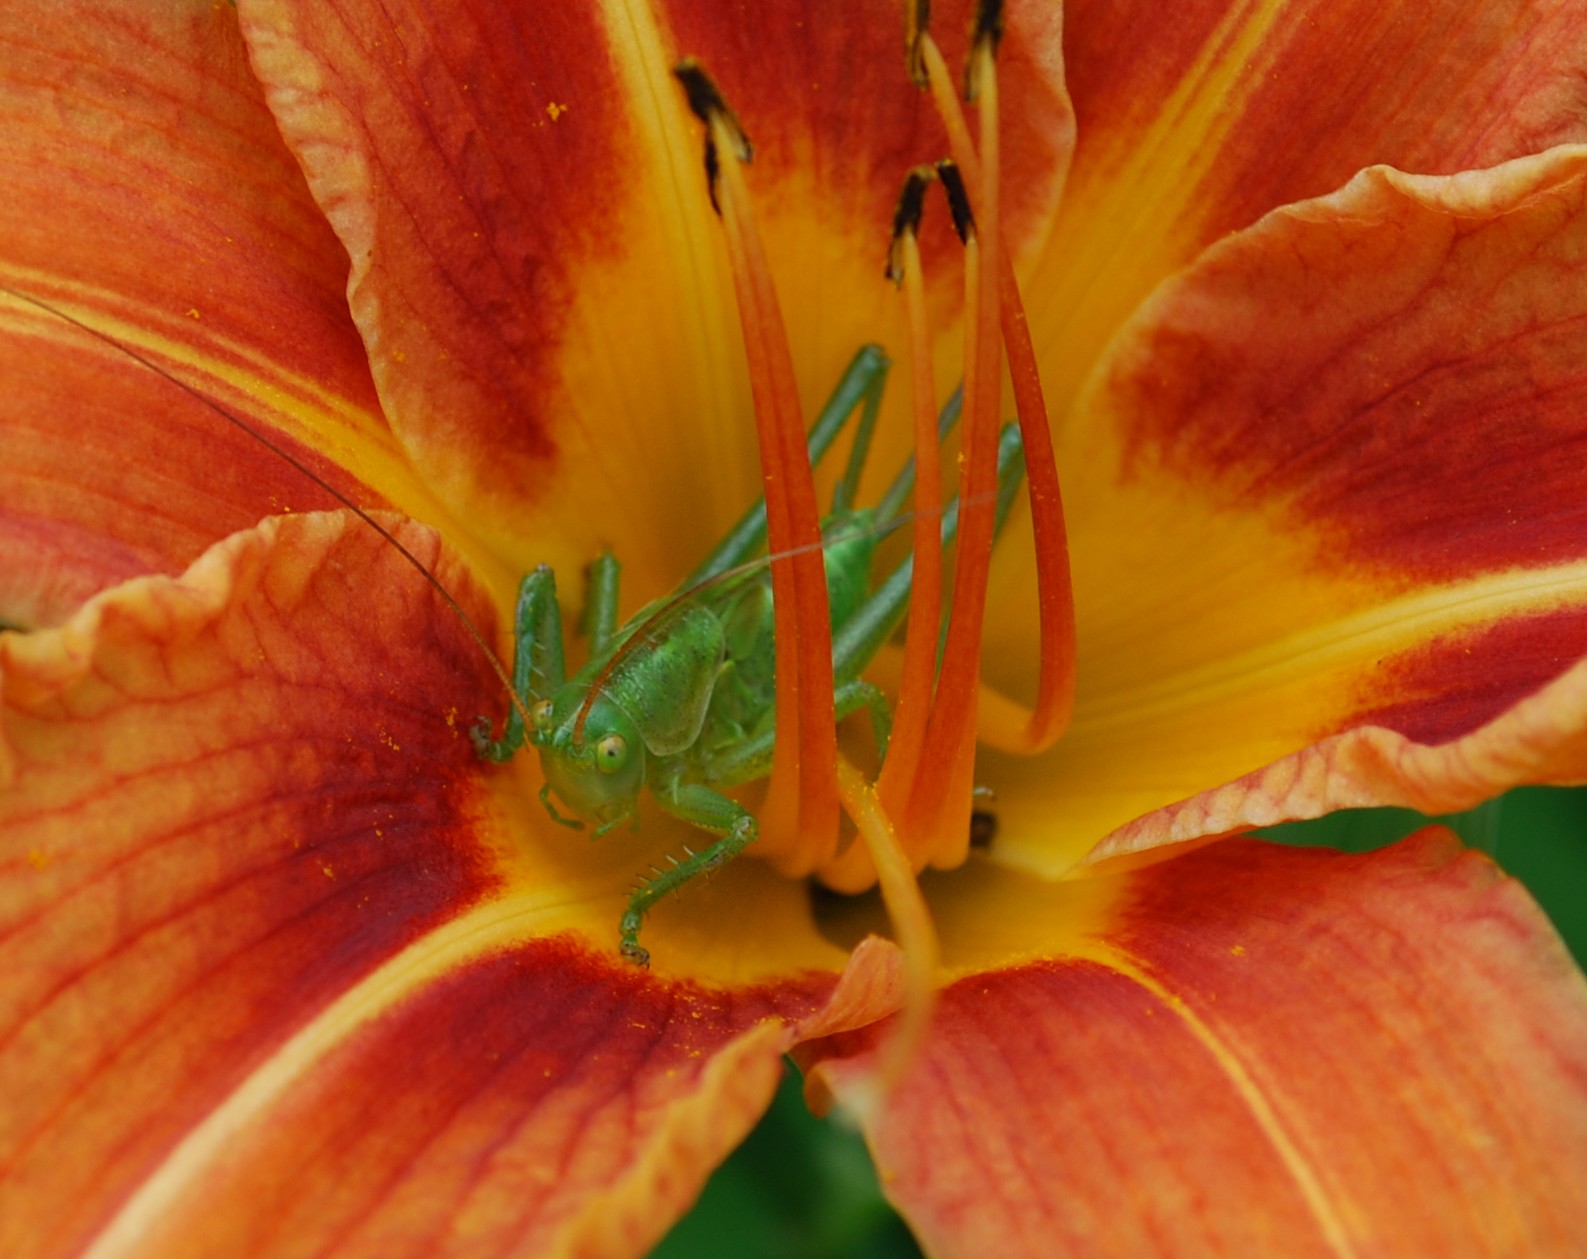 the small insect is sitting inside the large flower